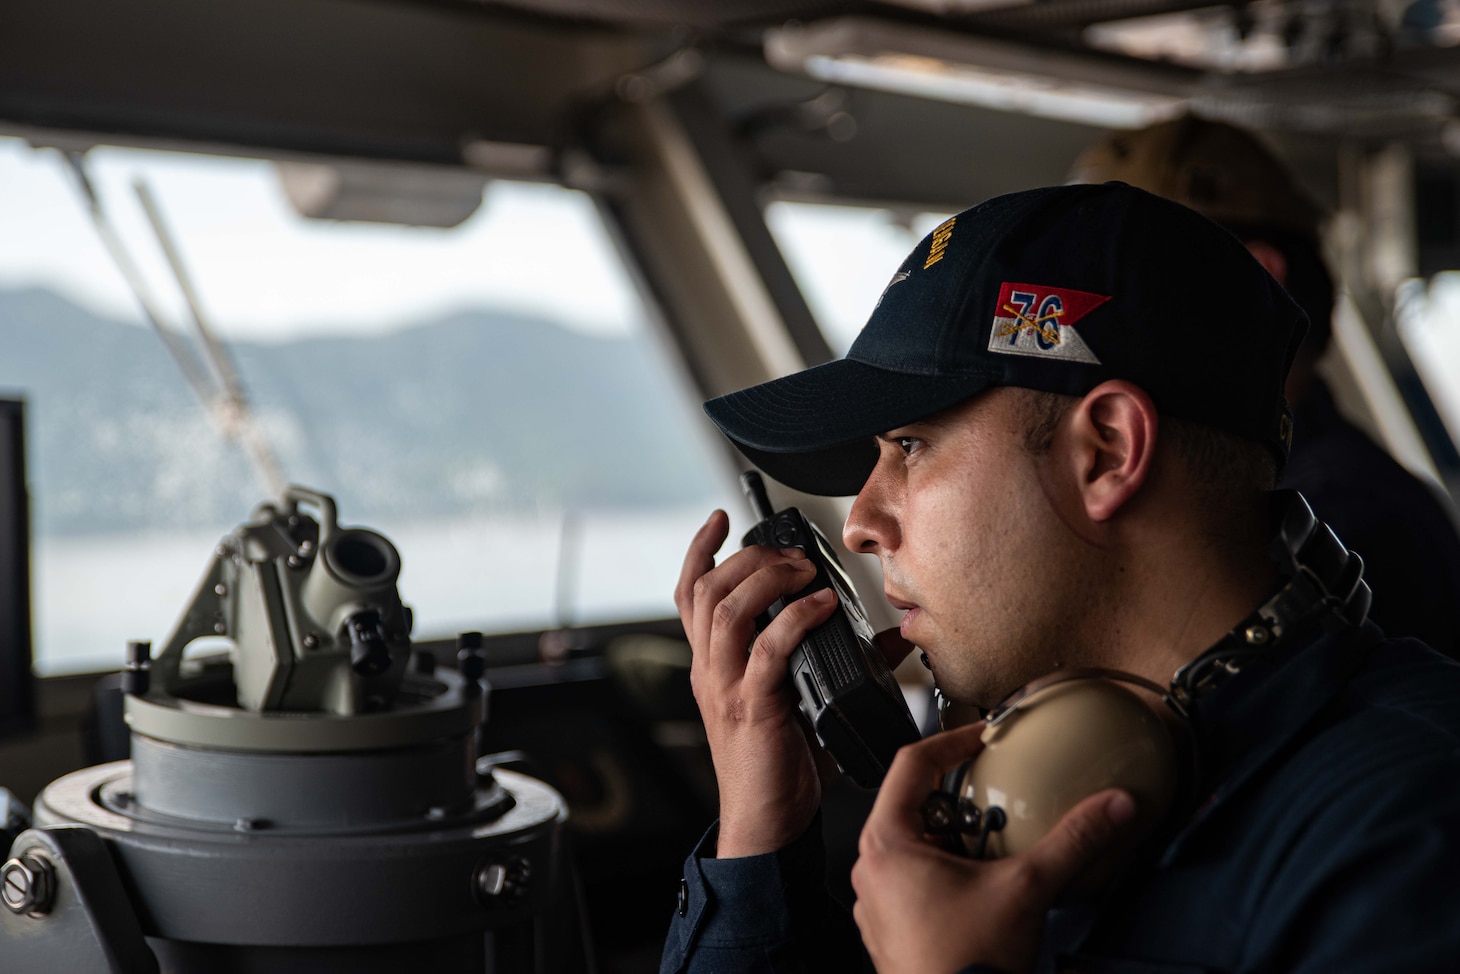 Aviation Ordnanceman 1st Class Sean Balboa, from Miami, communicates through a radio in the bridge of the U.S. Navy’s only forward-deployed aircraft carrier, USS Ronald Reagan (CVN 76), as the ship prepares to depart Da Nang, Vietnam, following a scheduled port visit, June 30, 2023. Ronald Reagan, the flagship of Carrier Strike Group 5, provides a combat-ready force that protects and defends the United States, and supports alliances, partnerships and collective maritime interests in the Indo-Pacific region.